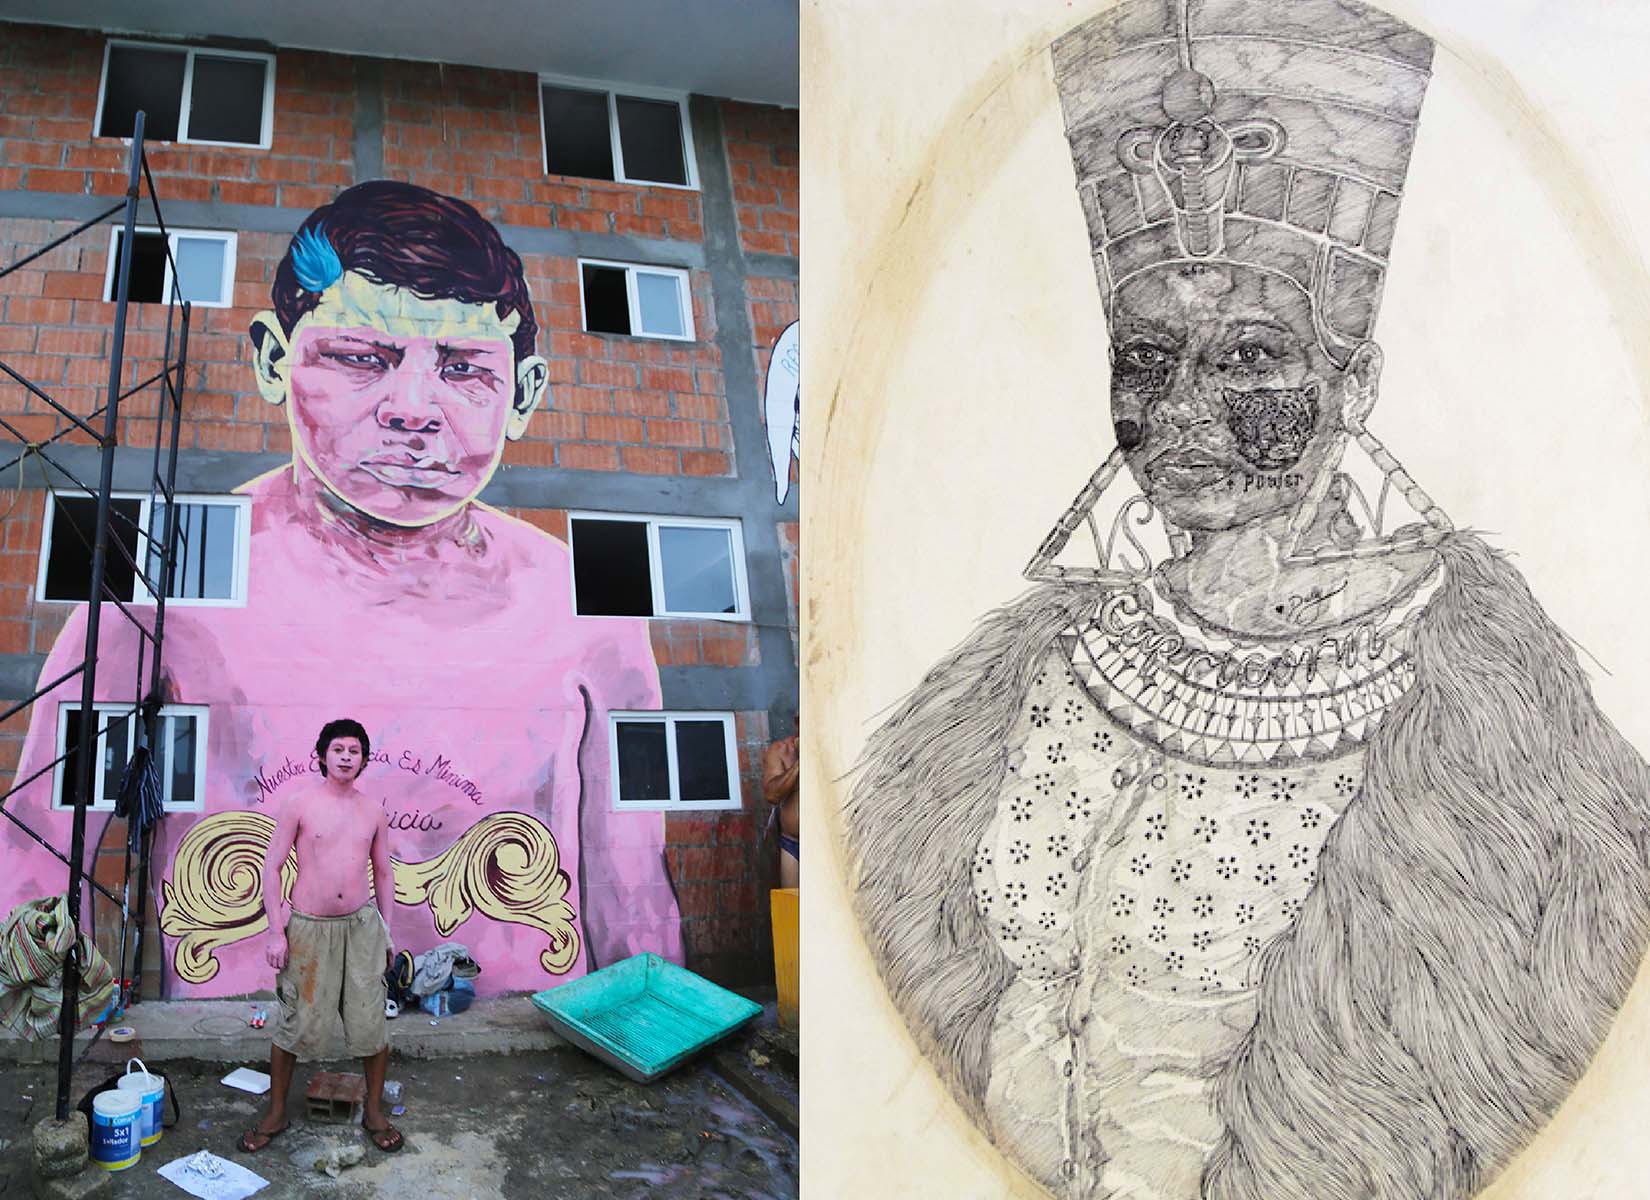 (Left) La 72, Tenosique Chiapas. Albuergue Migrante. Courtesy of Caleb Duarte. (Right) Isabel, Queen of Harlem. The good mother we all wished we had. Messier no. 41., 2017. Courtesy of Umar Rashid.